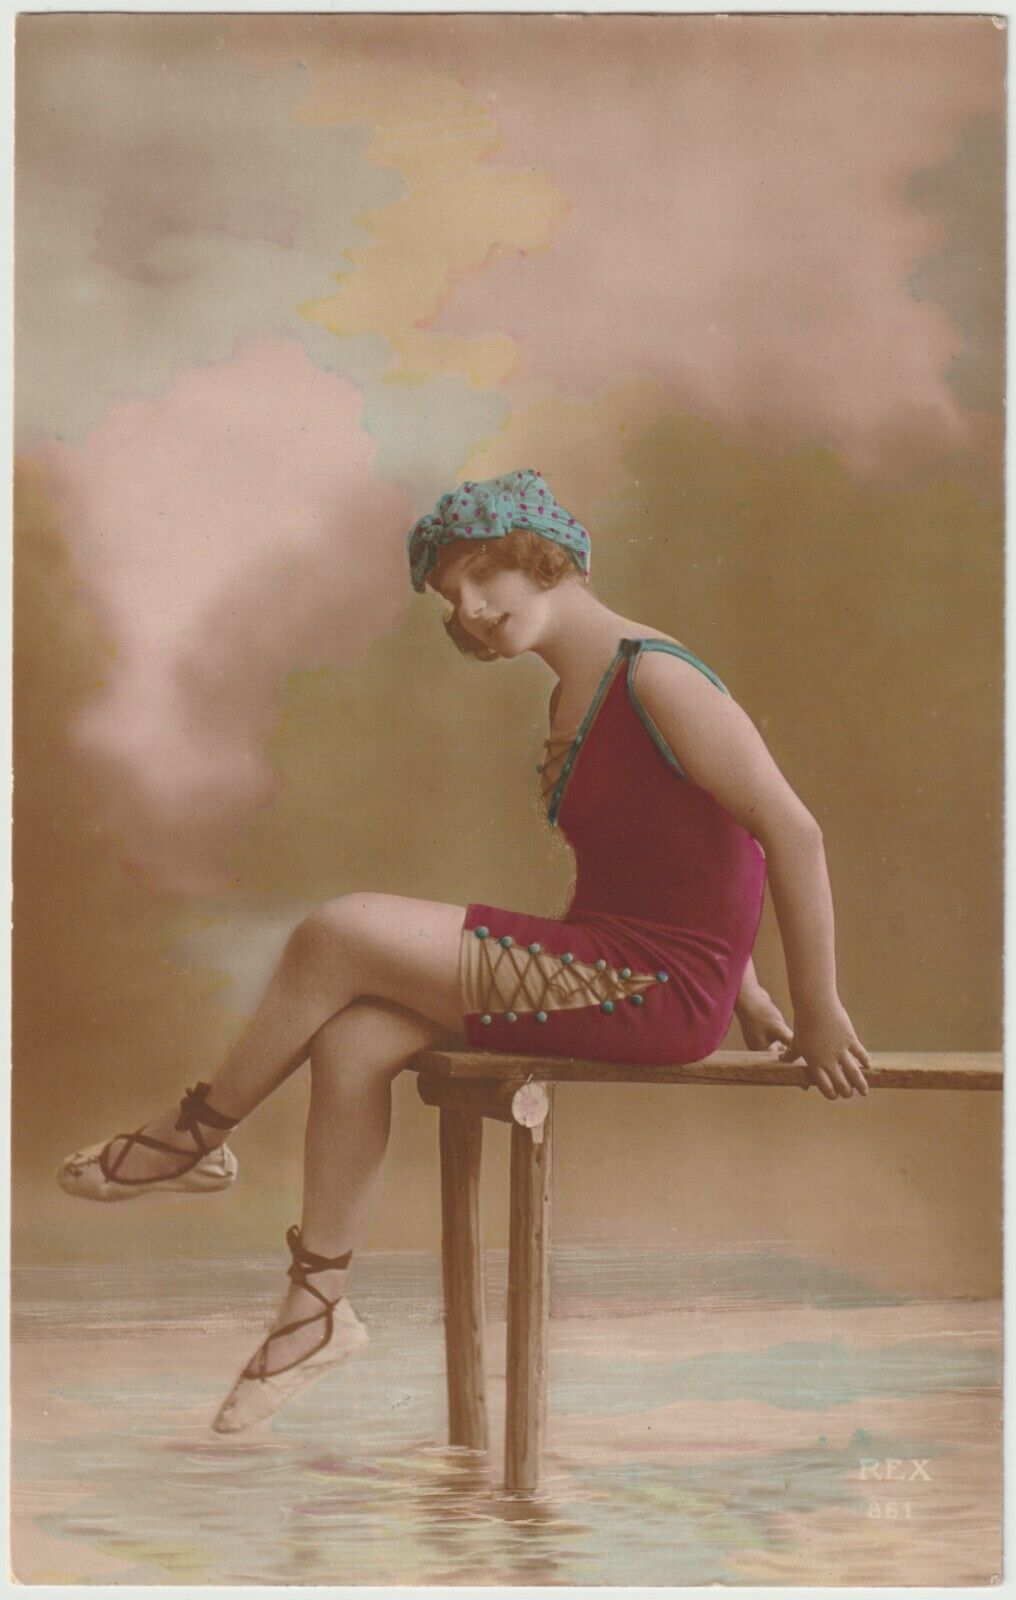 Rare French hand tinted real photo postcard bathing beauty risque 1920 RPPC #922